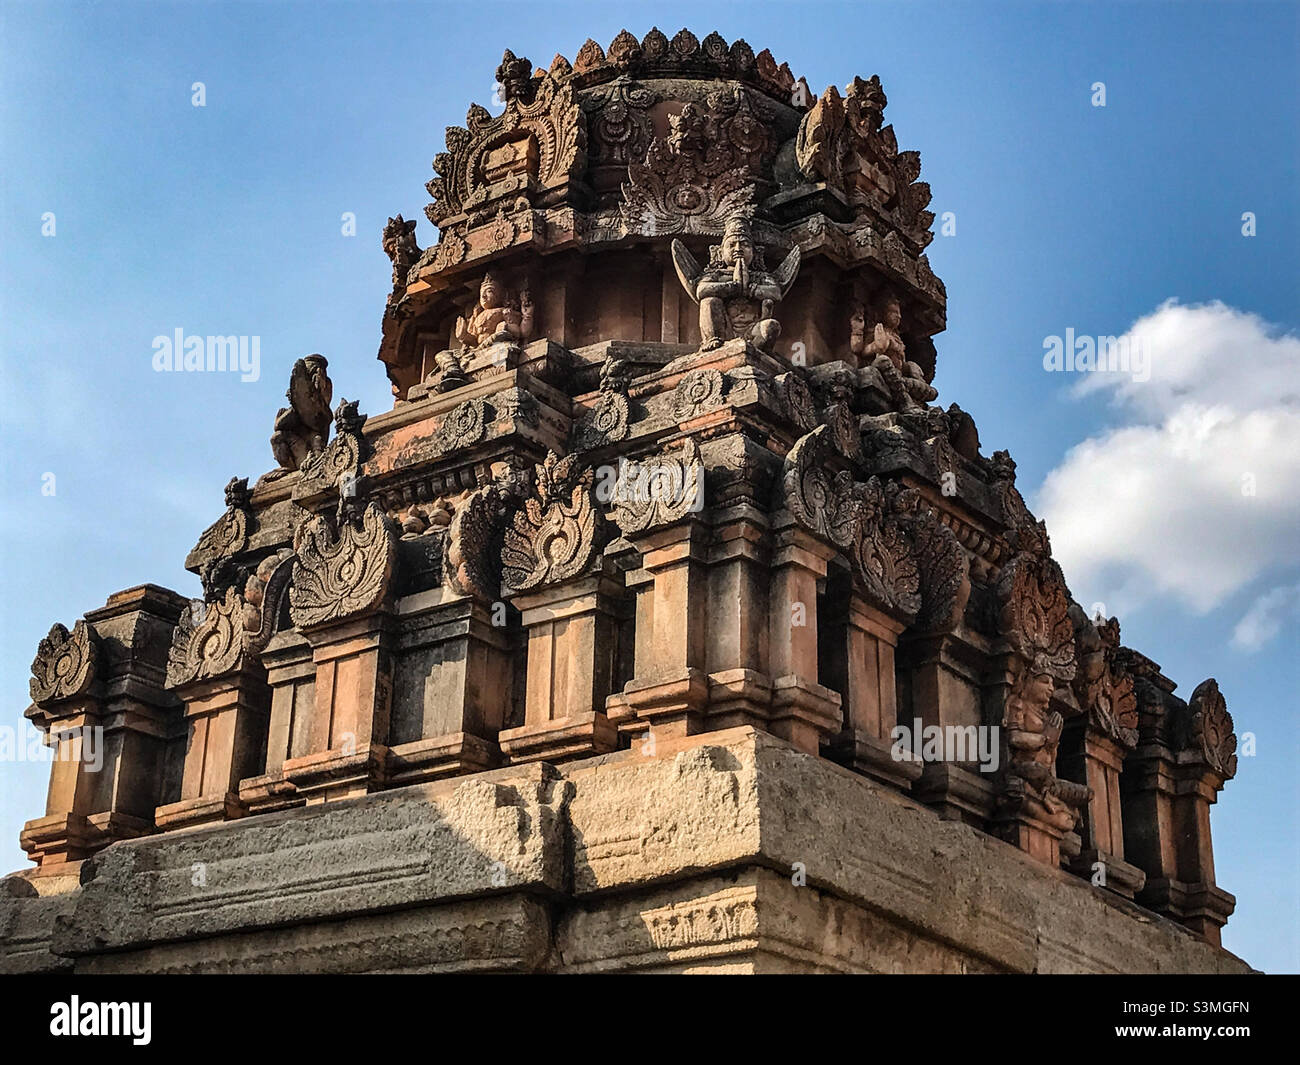 Indian temple architecture Stock Photo